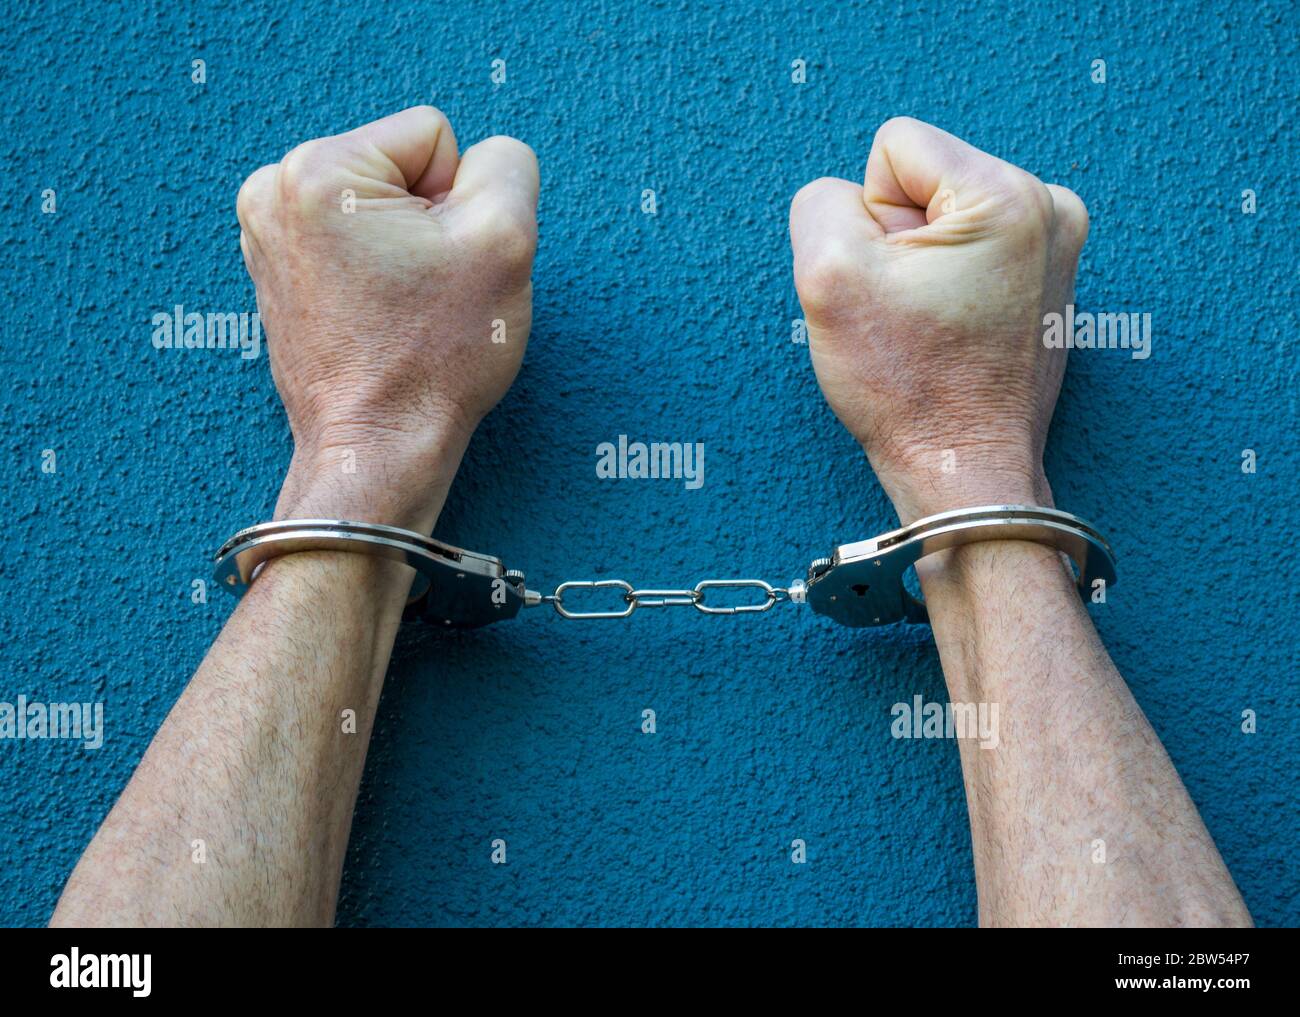 arms and fists of a Caucasian man in handcuffs against a blue background with copy space Stock Photo